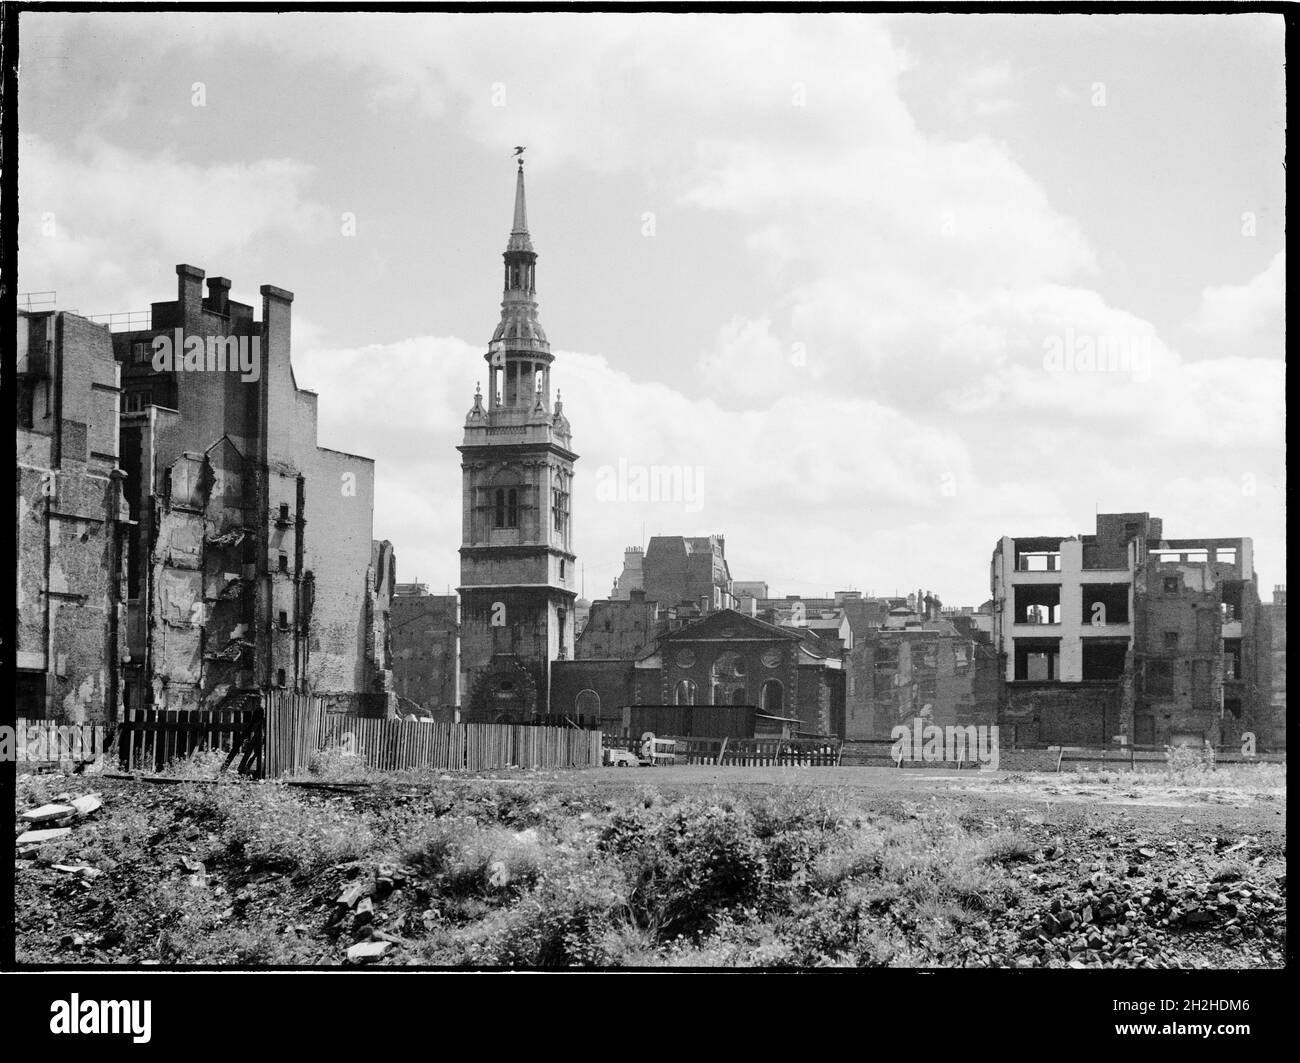 St Mary-le-Bow Church, Cheapside, City and County of the City of London, Greater London Authority, 1941-1945. A view looking east across a bomb damaged landscape towards St Mary-le-Bow Church. St Mary-le-Bow was rebuilt by Christopher Wren after the Great Fire of London in 1666. During the Second World War it was almost destroyed by bombing on 10th May 1941 with incendiary bombs causing a fire which sent the bells in its tower crashing down to the ground. The tower was left standing and restoration of the church began in 1956. Stock Photo